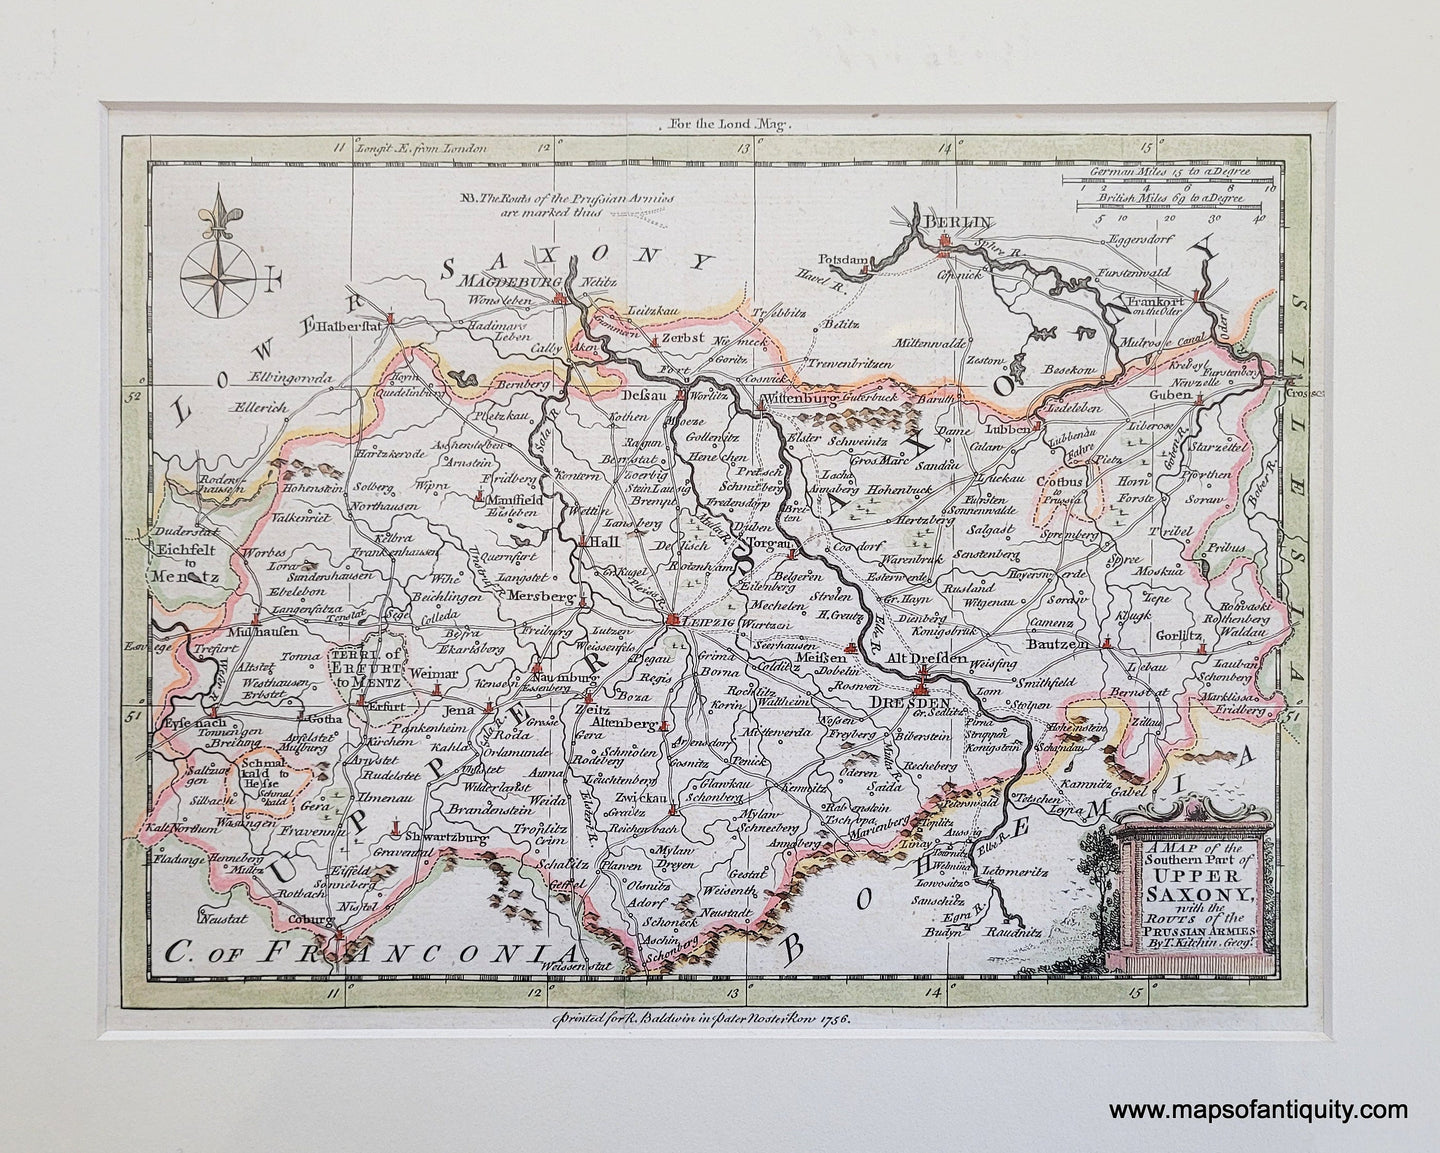 Genuine-Antique-Map-A-Map-of-the-Southern-Part-of-Upper-Saxony-with-the-Routs-of-the-Prussian-Armies-1756-Kitchin-London-Magazine-Maps-Of-Antiquity